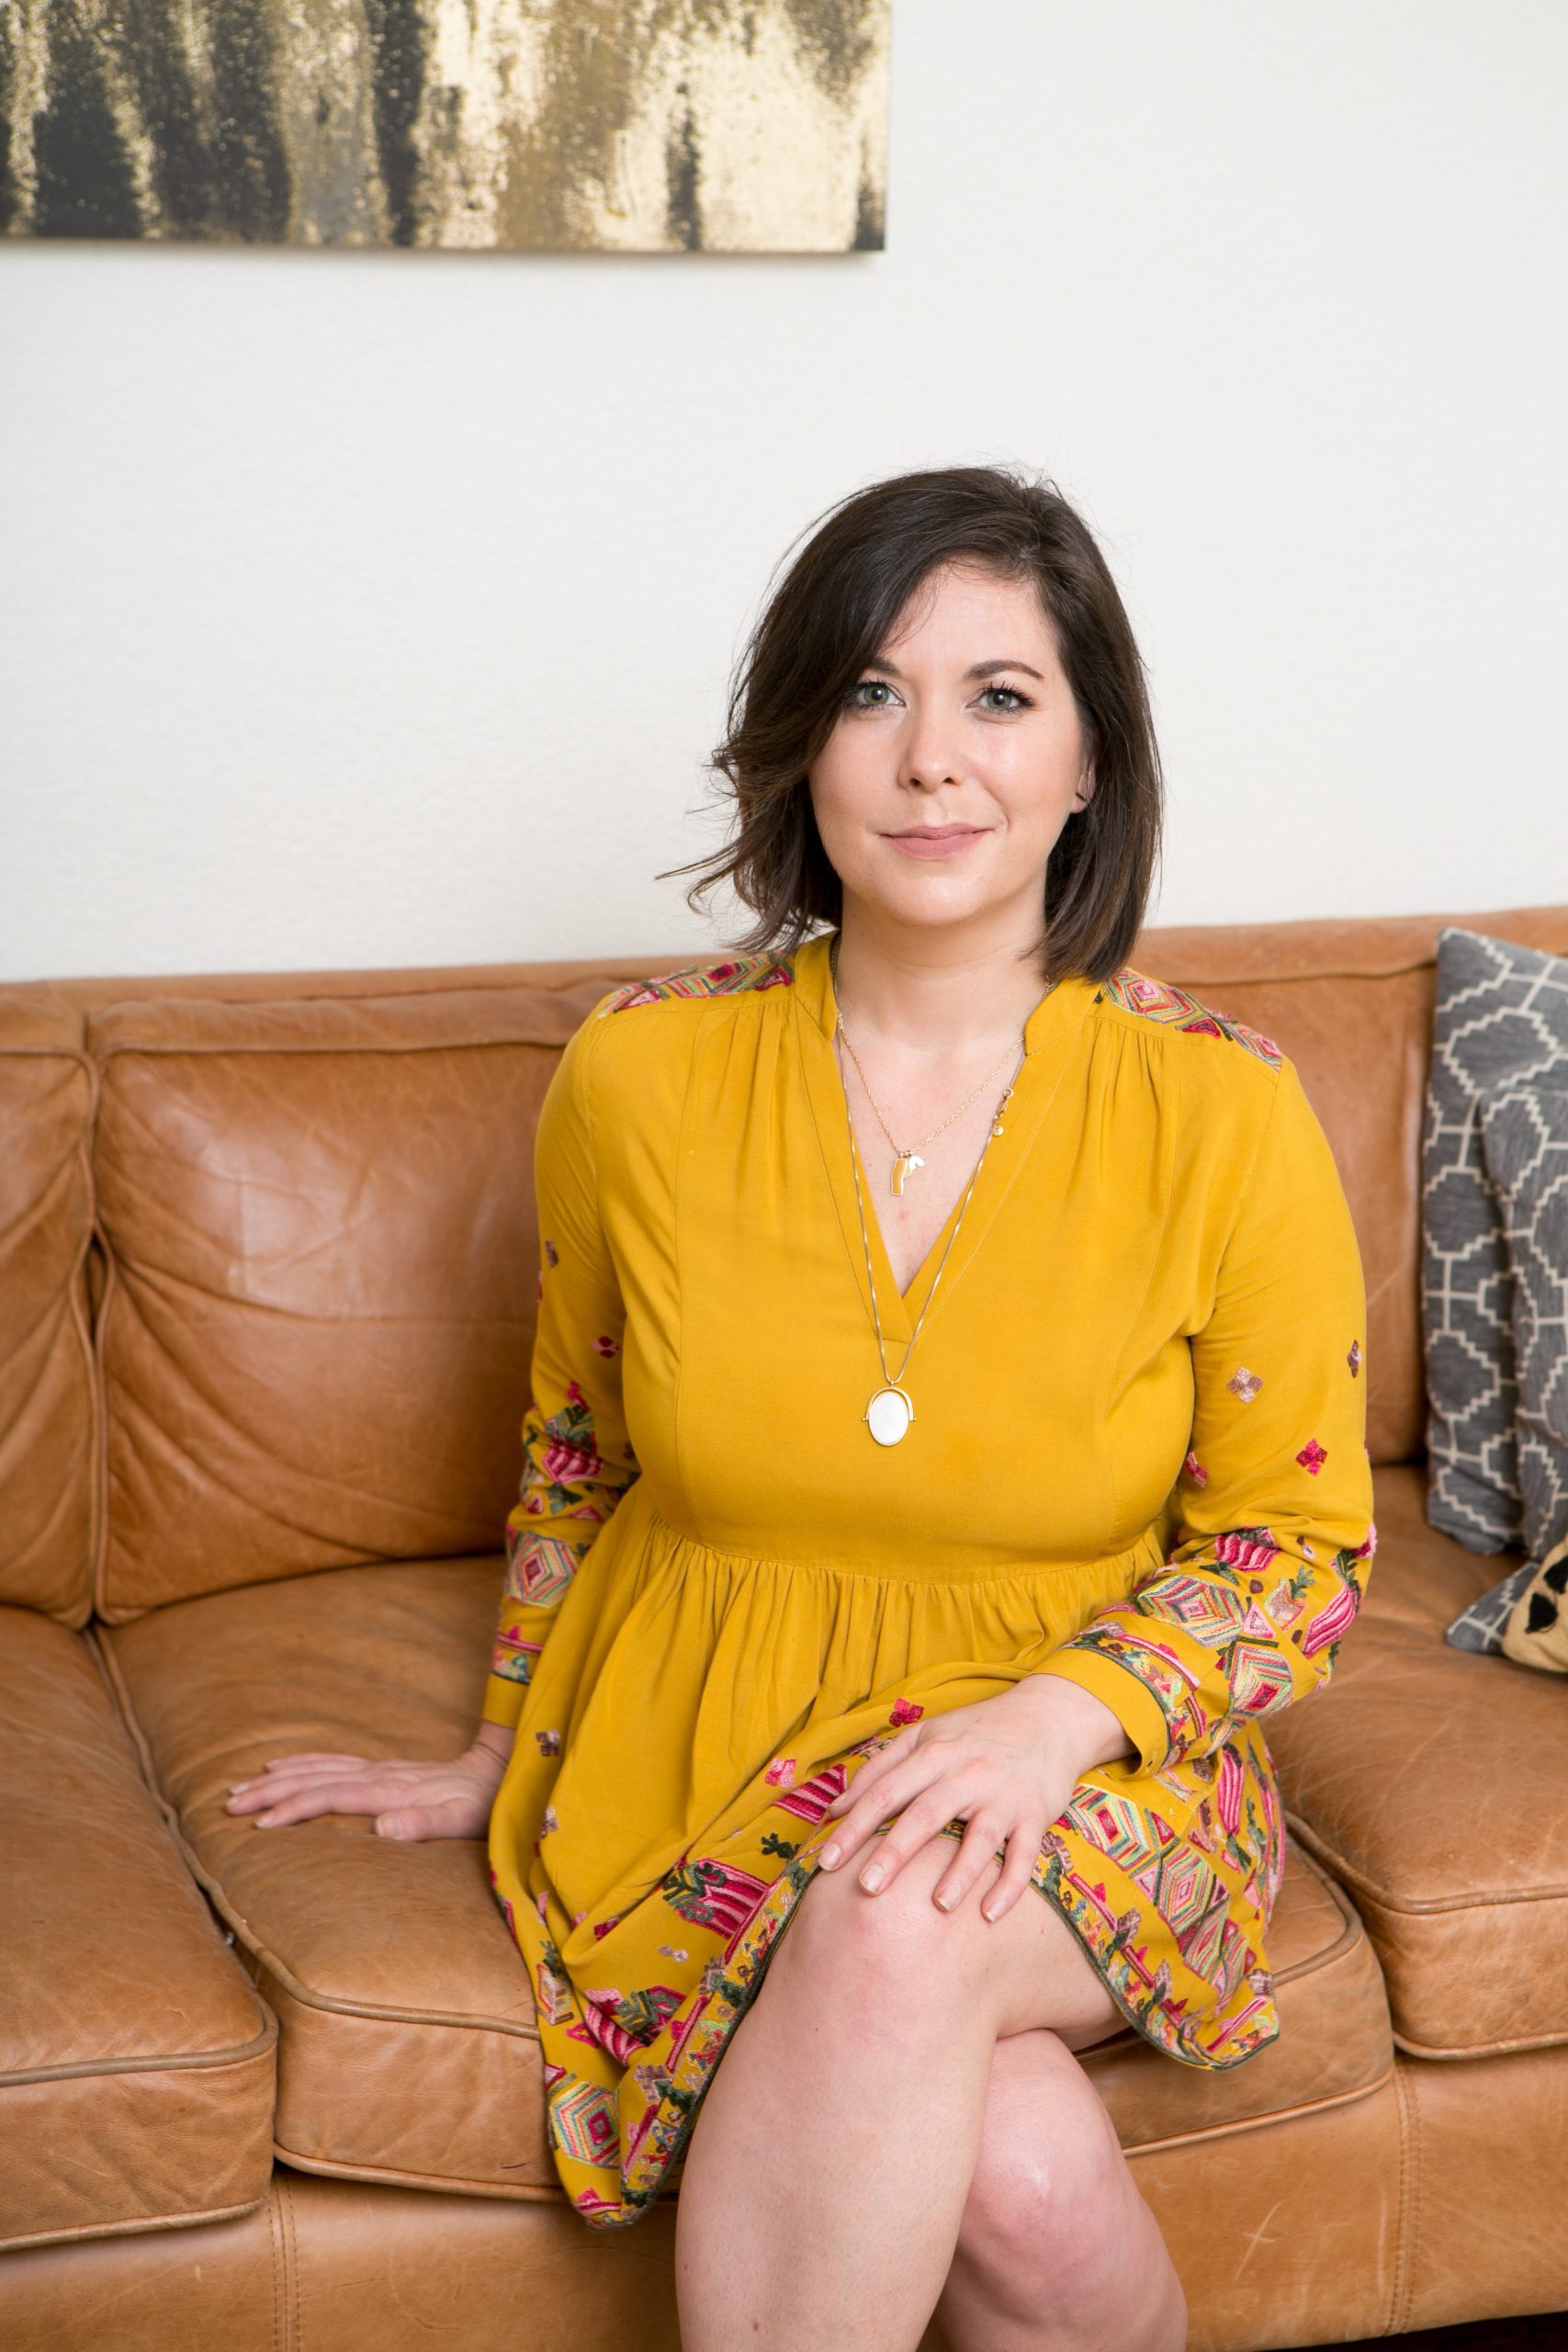 Michelle Harwell in a yellow dress sitting on a leather couch